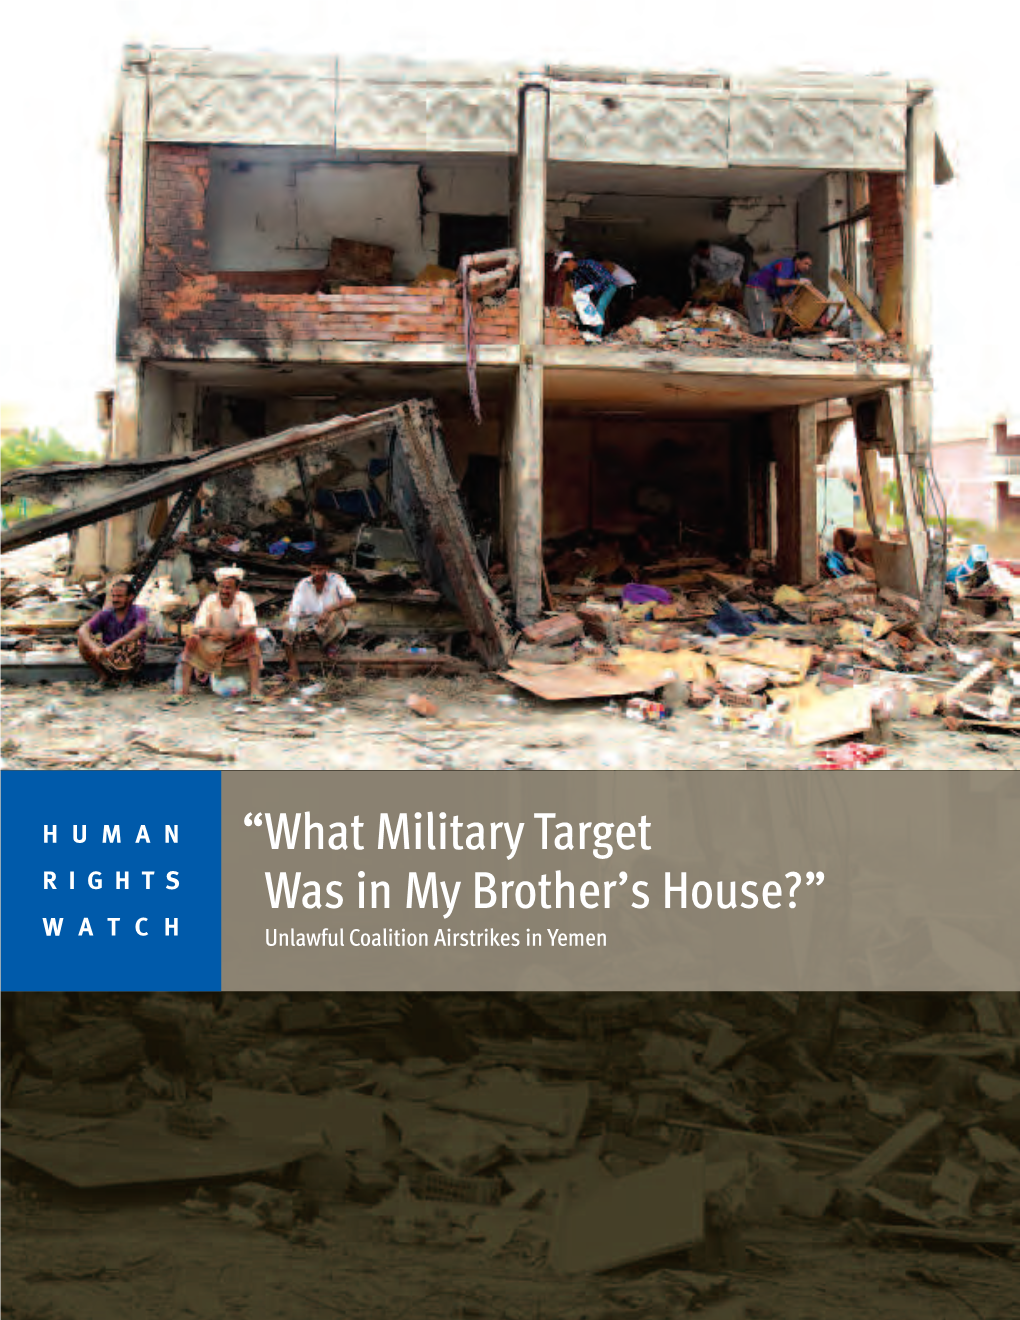 “What Military Target Was in My Brother's